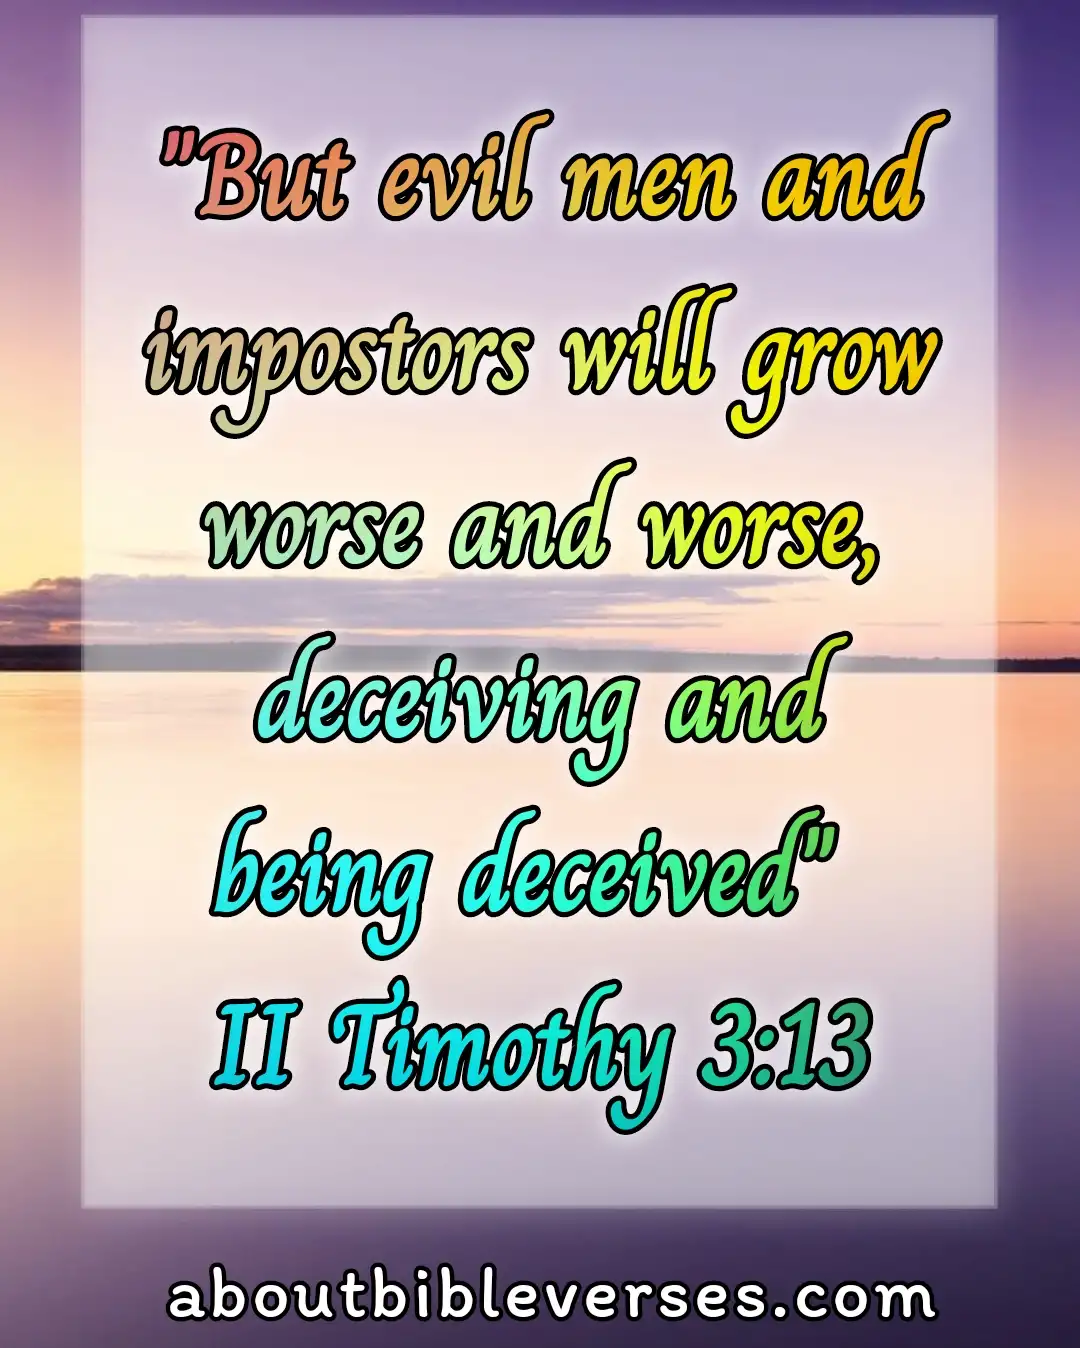 bible verse about deception in the last days (2 Timothy 3:13)